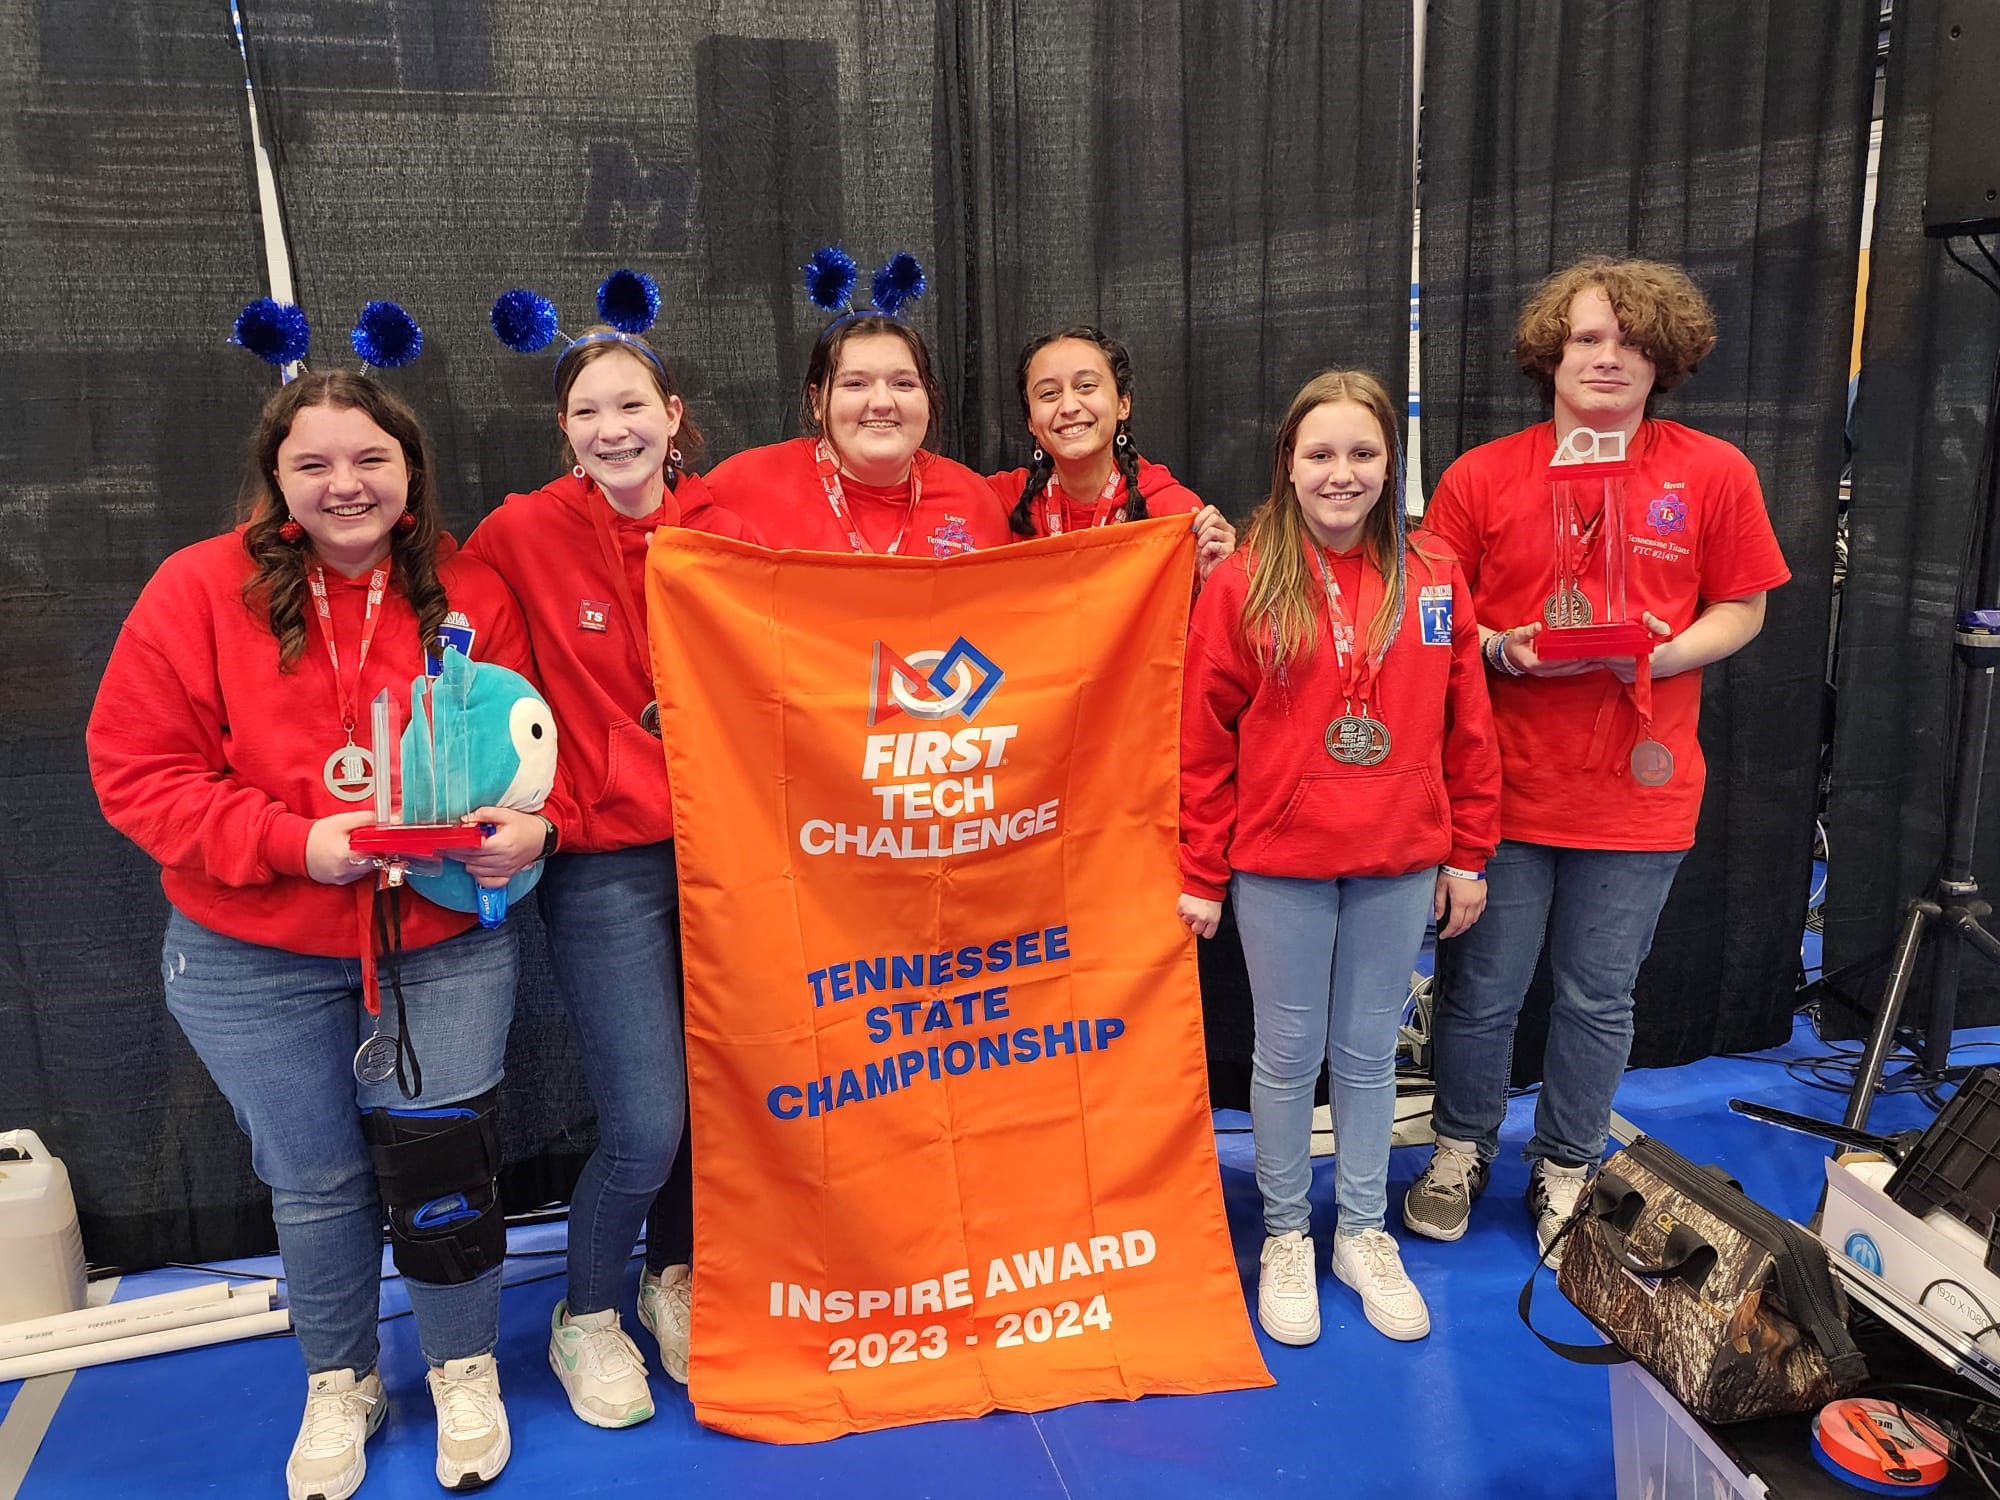 The Tennessine Titans after winning the 2024 INSPIRE Award at the FIRST Tech Challenge Tennessee State Championship. Credit: Cleve Coates